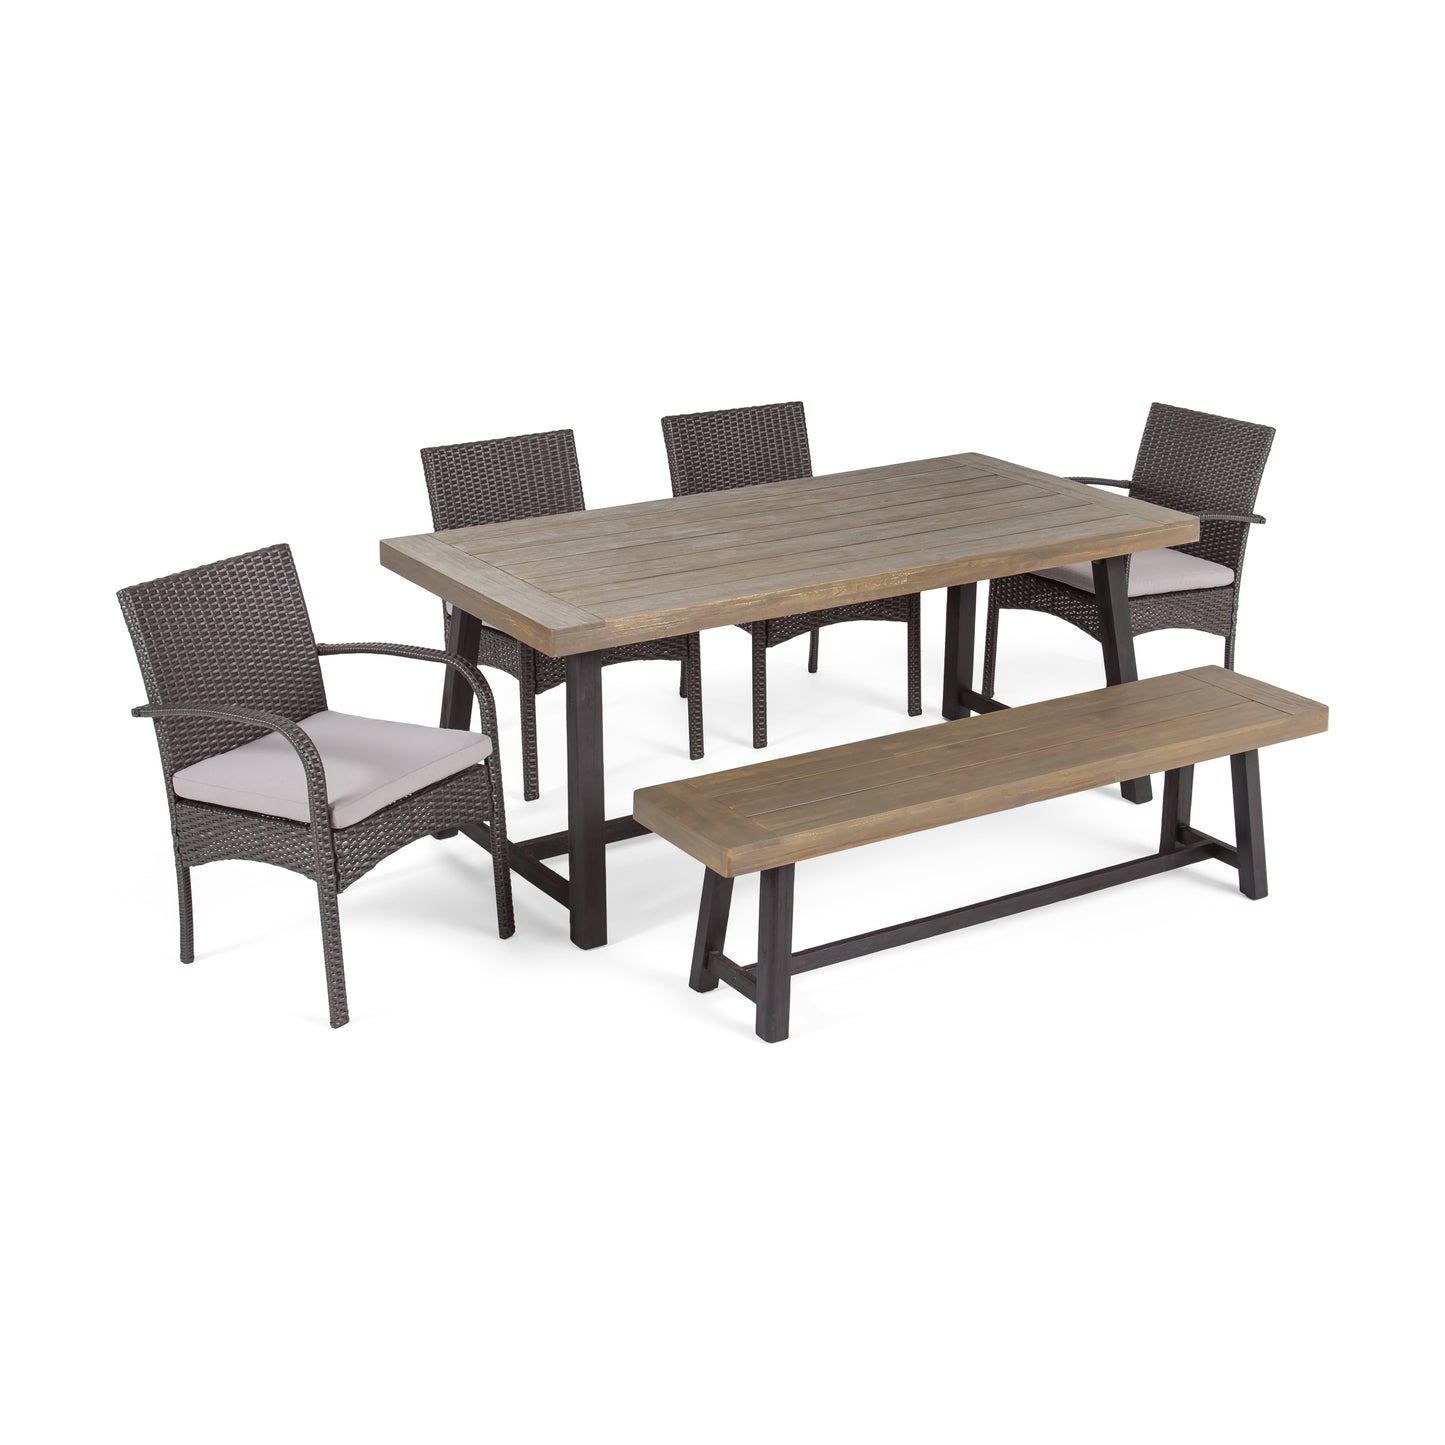 Temorah Outdoor 6 Piece Dining Set with Wicker Chairs and Bench